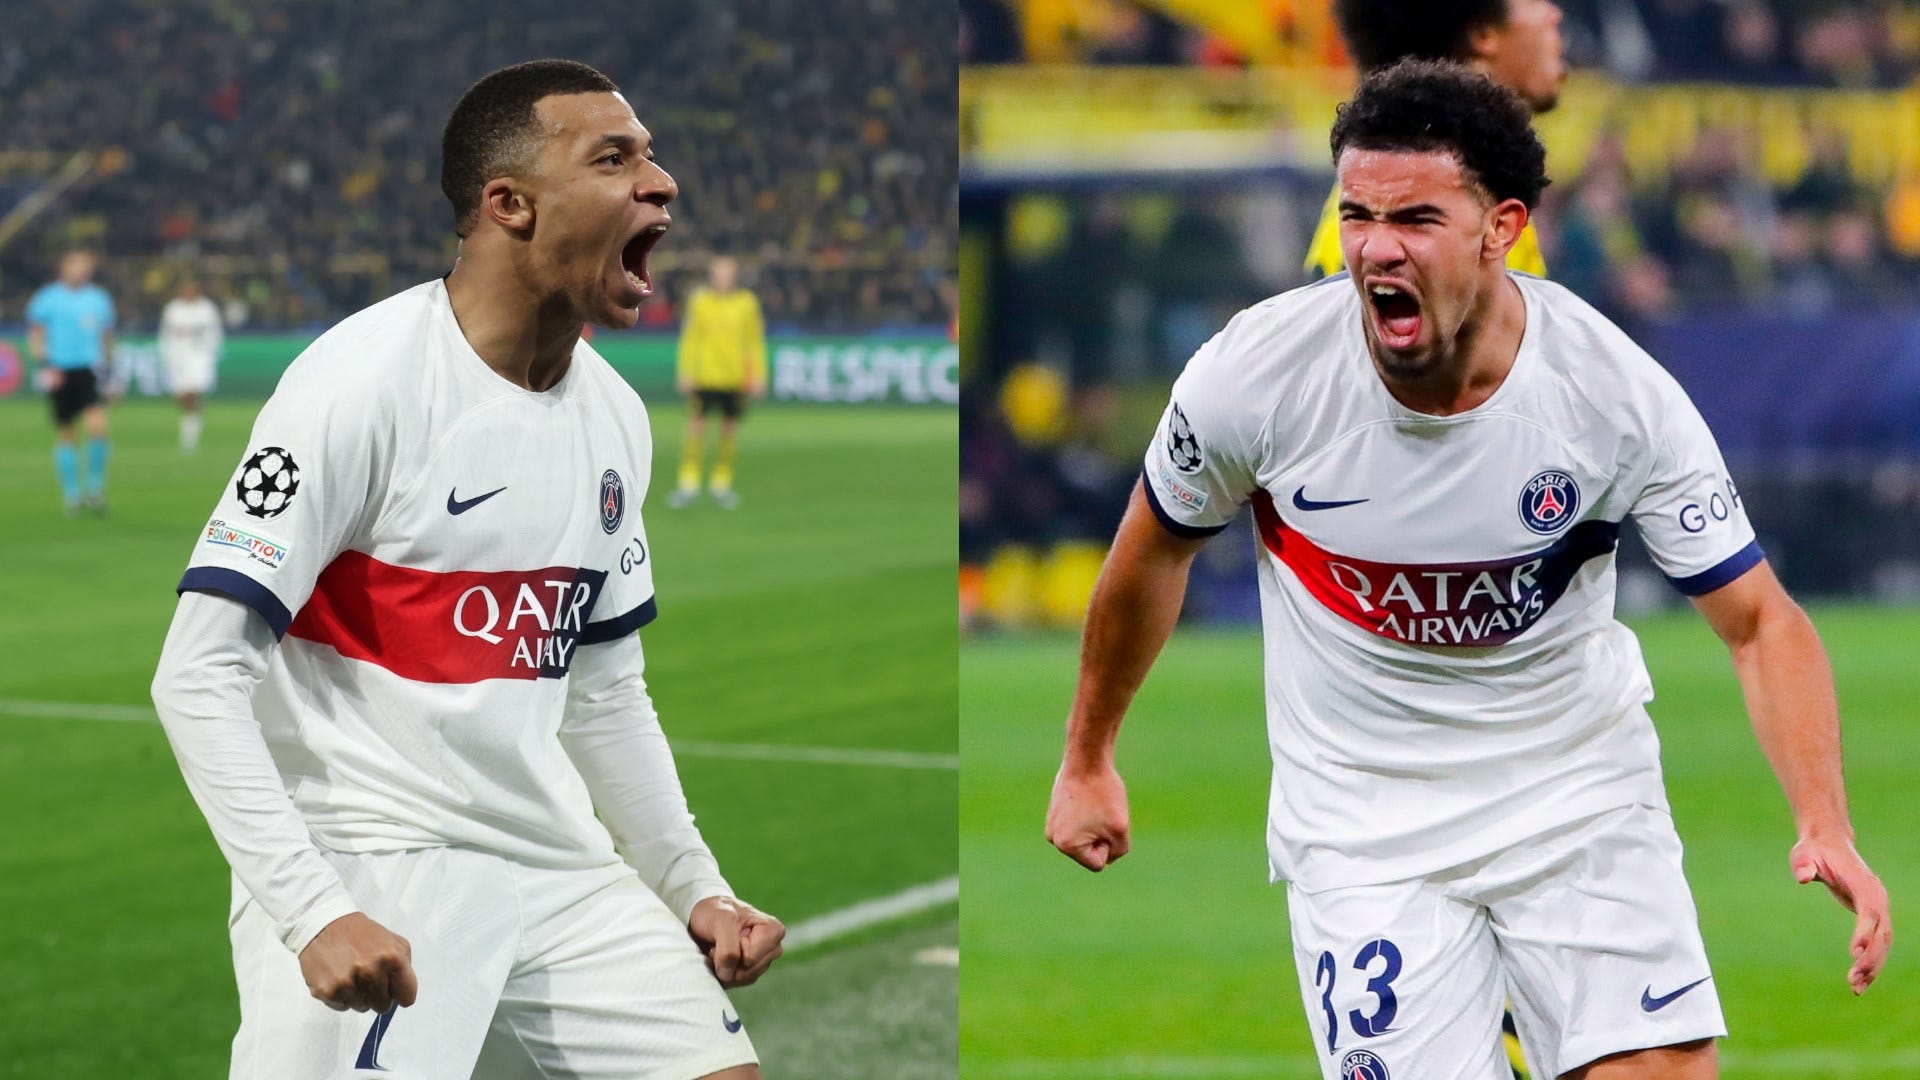 PSG player ratings vs Borussia Dortmund: €175m spent on strikers, but Parisians lean on 17-year-old midfielder Warren Zaire-Emery to scrape into Champions League last 16 as Kylian Mbappe turns provider thumbnail